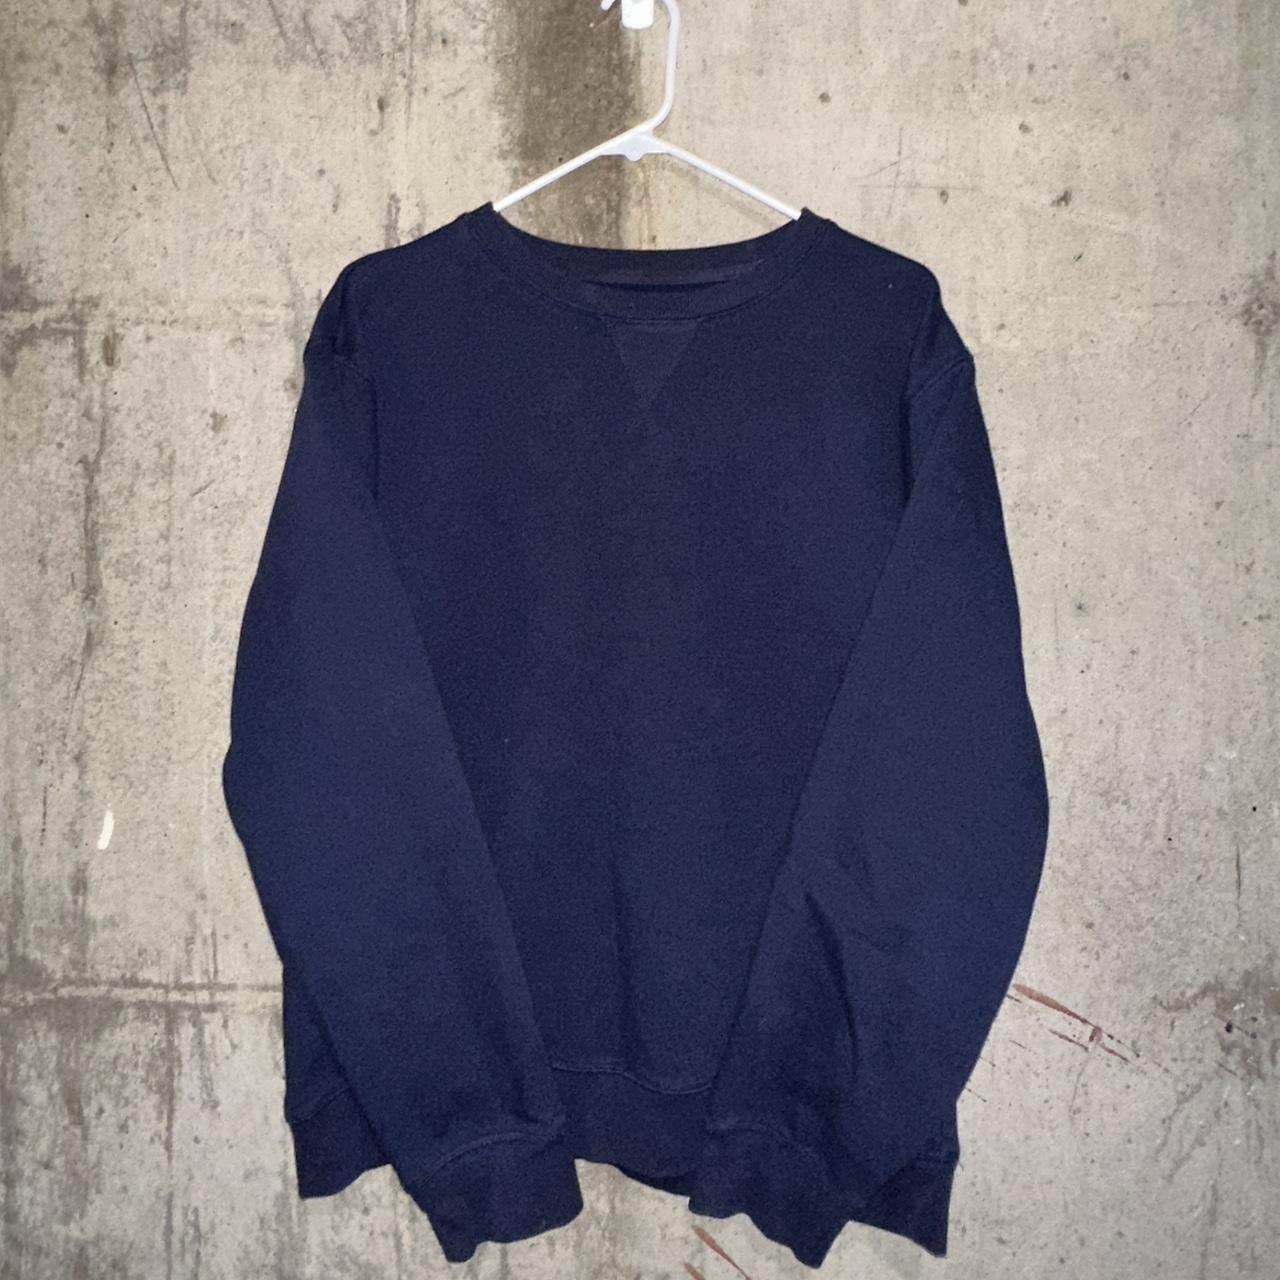 item listed by retrothriftco